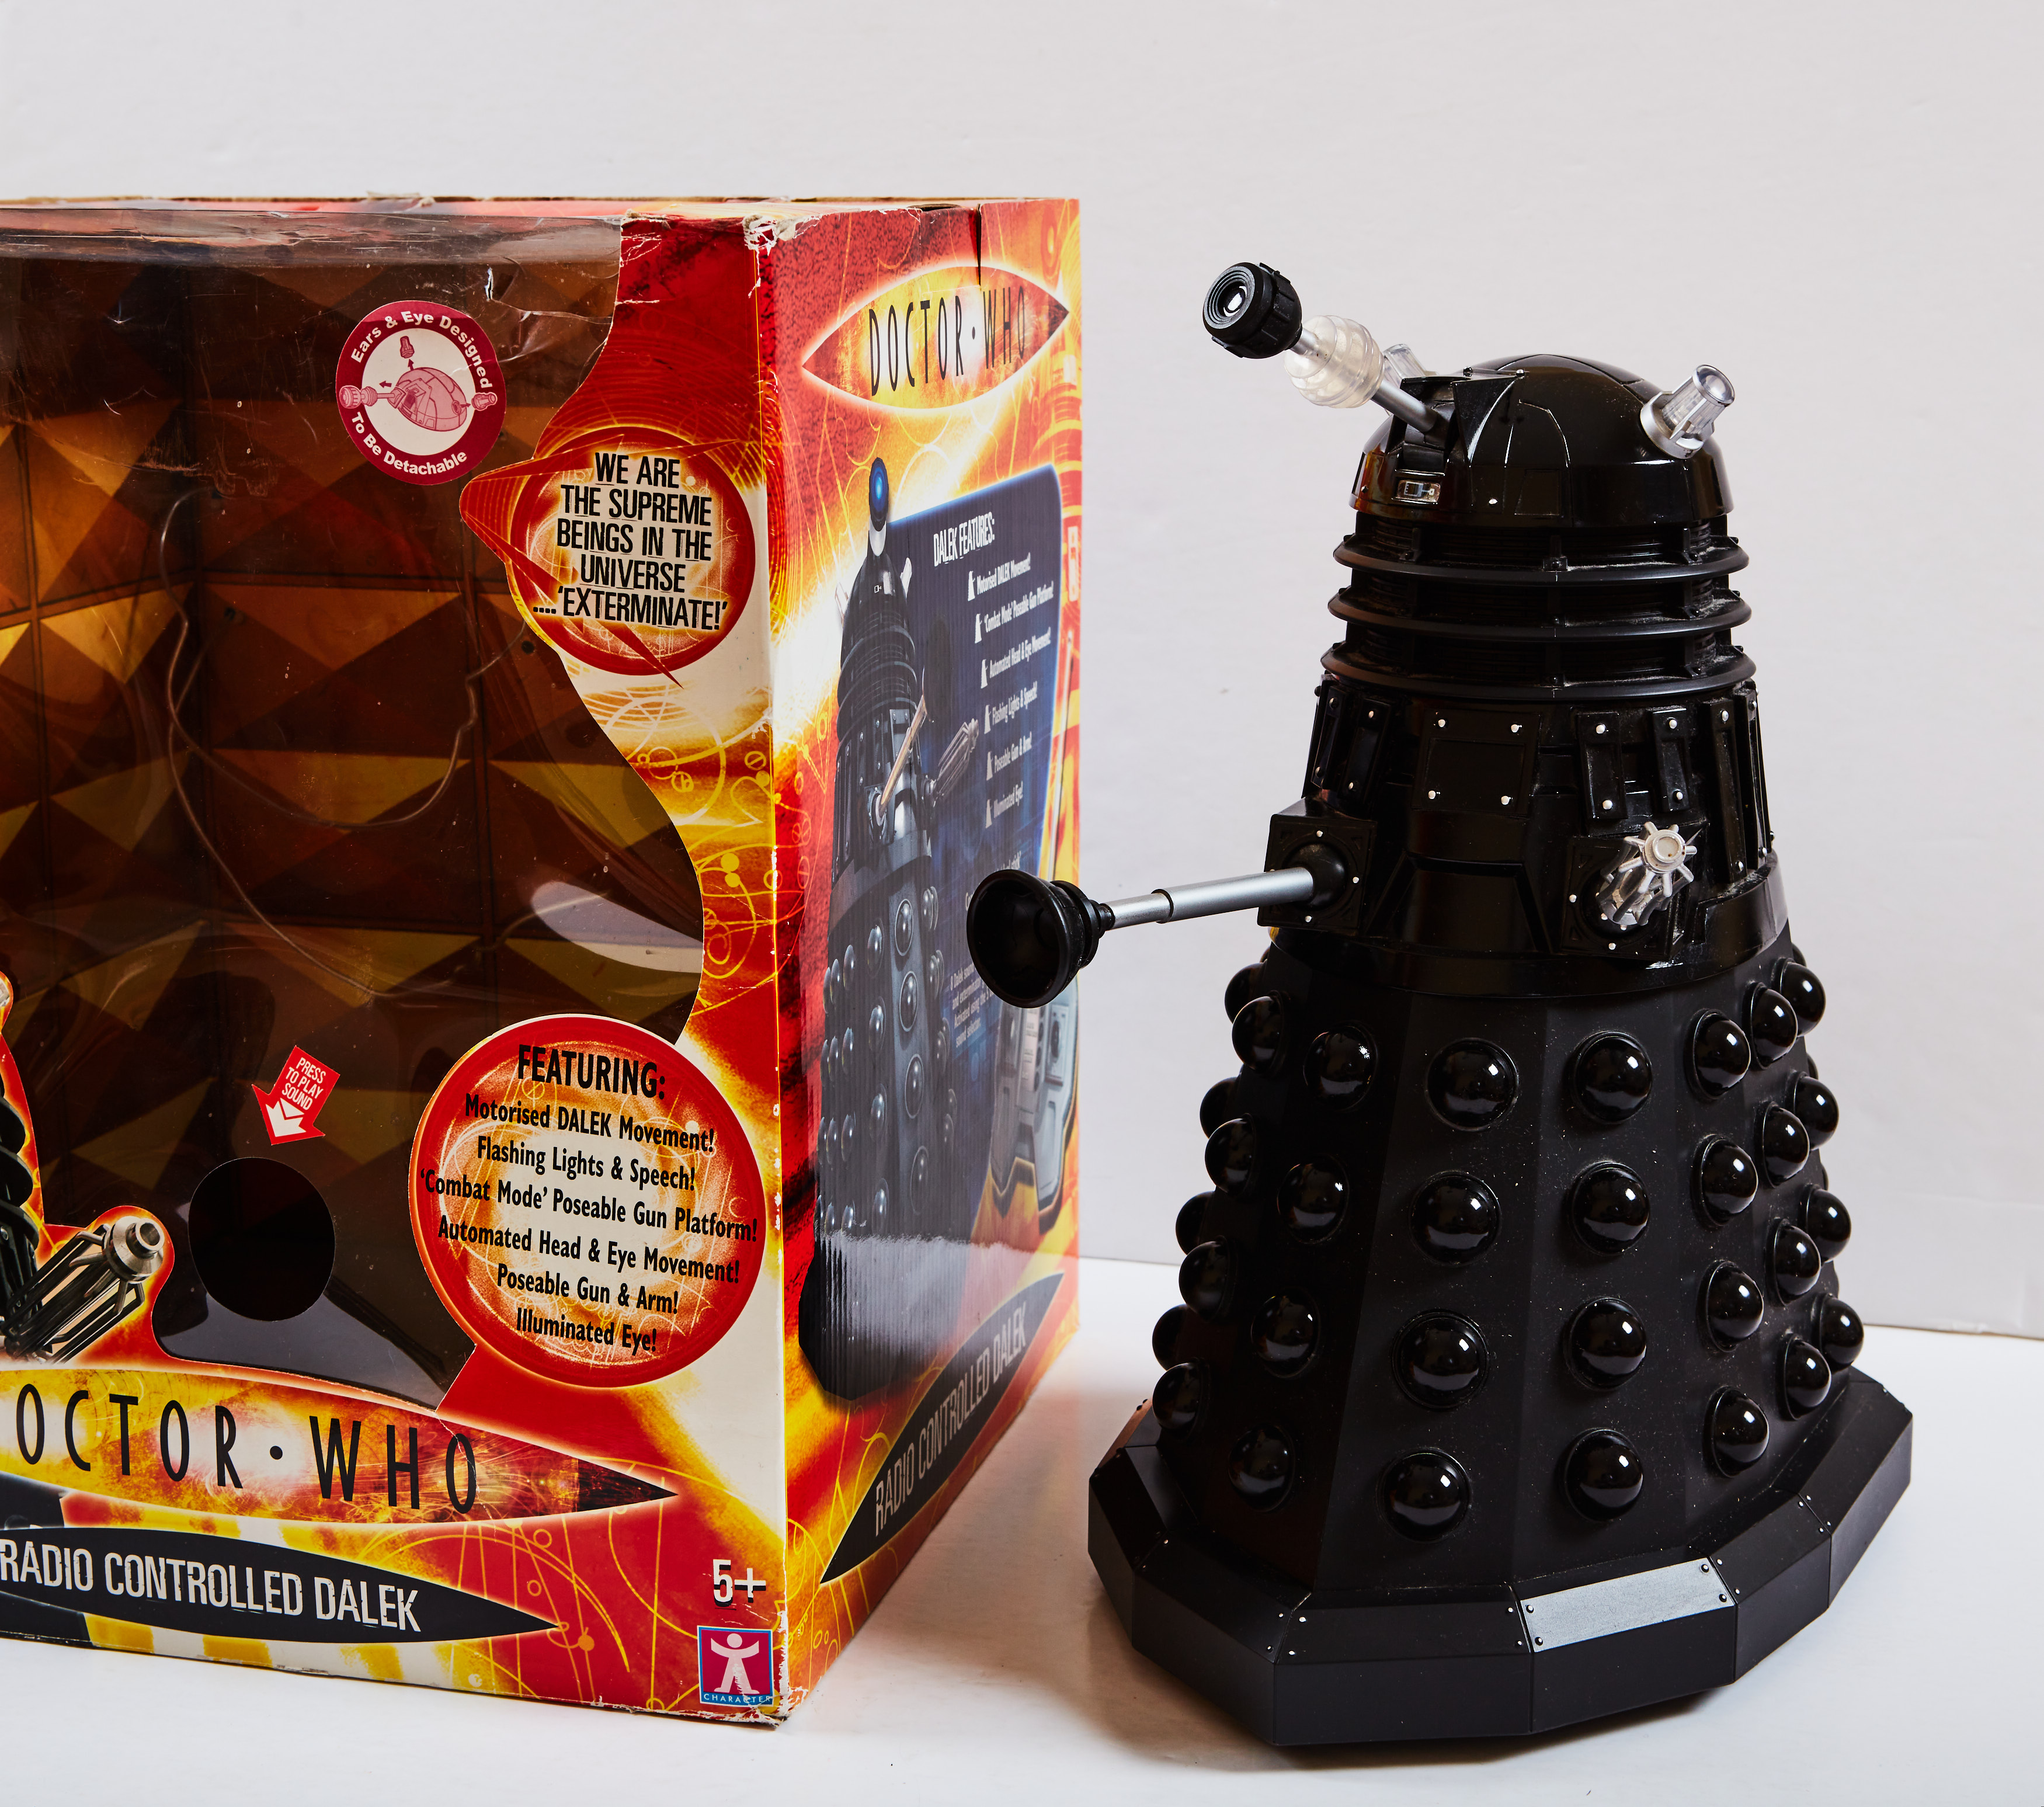 Doctor Who 12" Radio Controlled Dalek in original box (2004) with instructions. Missing Remote - Image 3 of 3